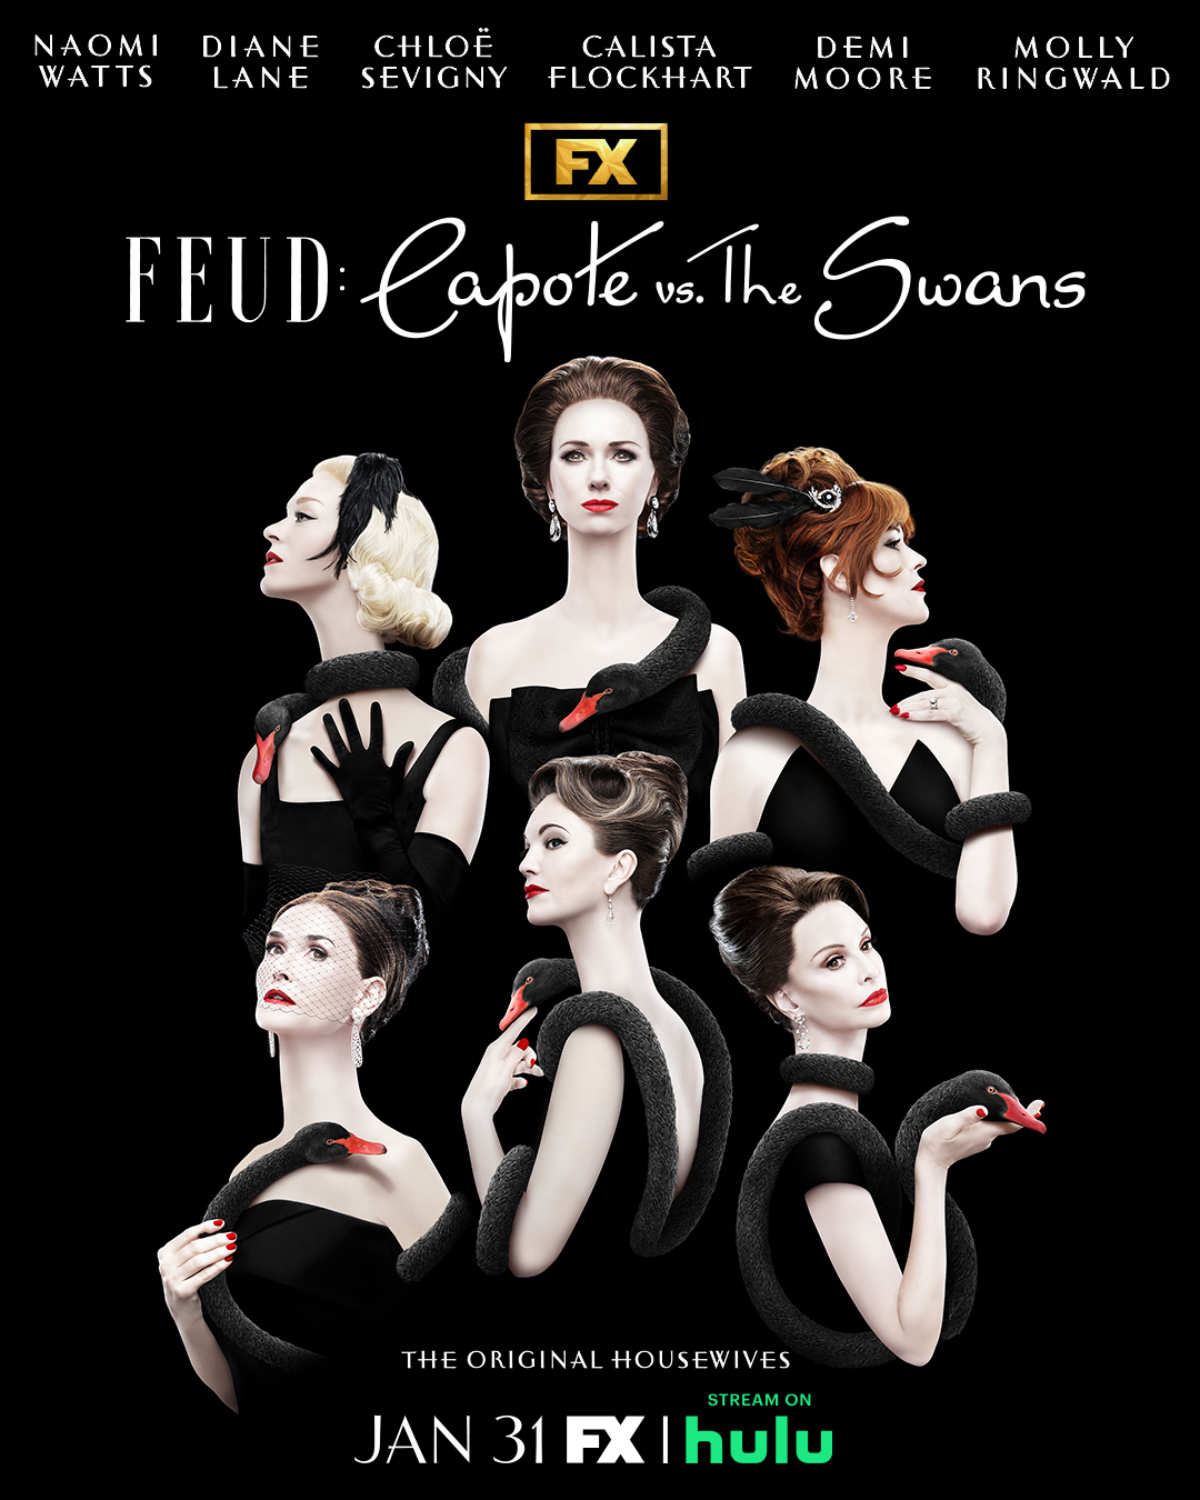 FEUD: Capote Vs. The Swans